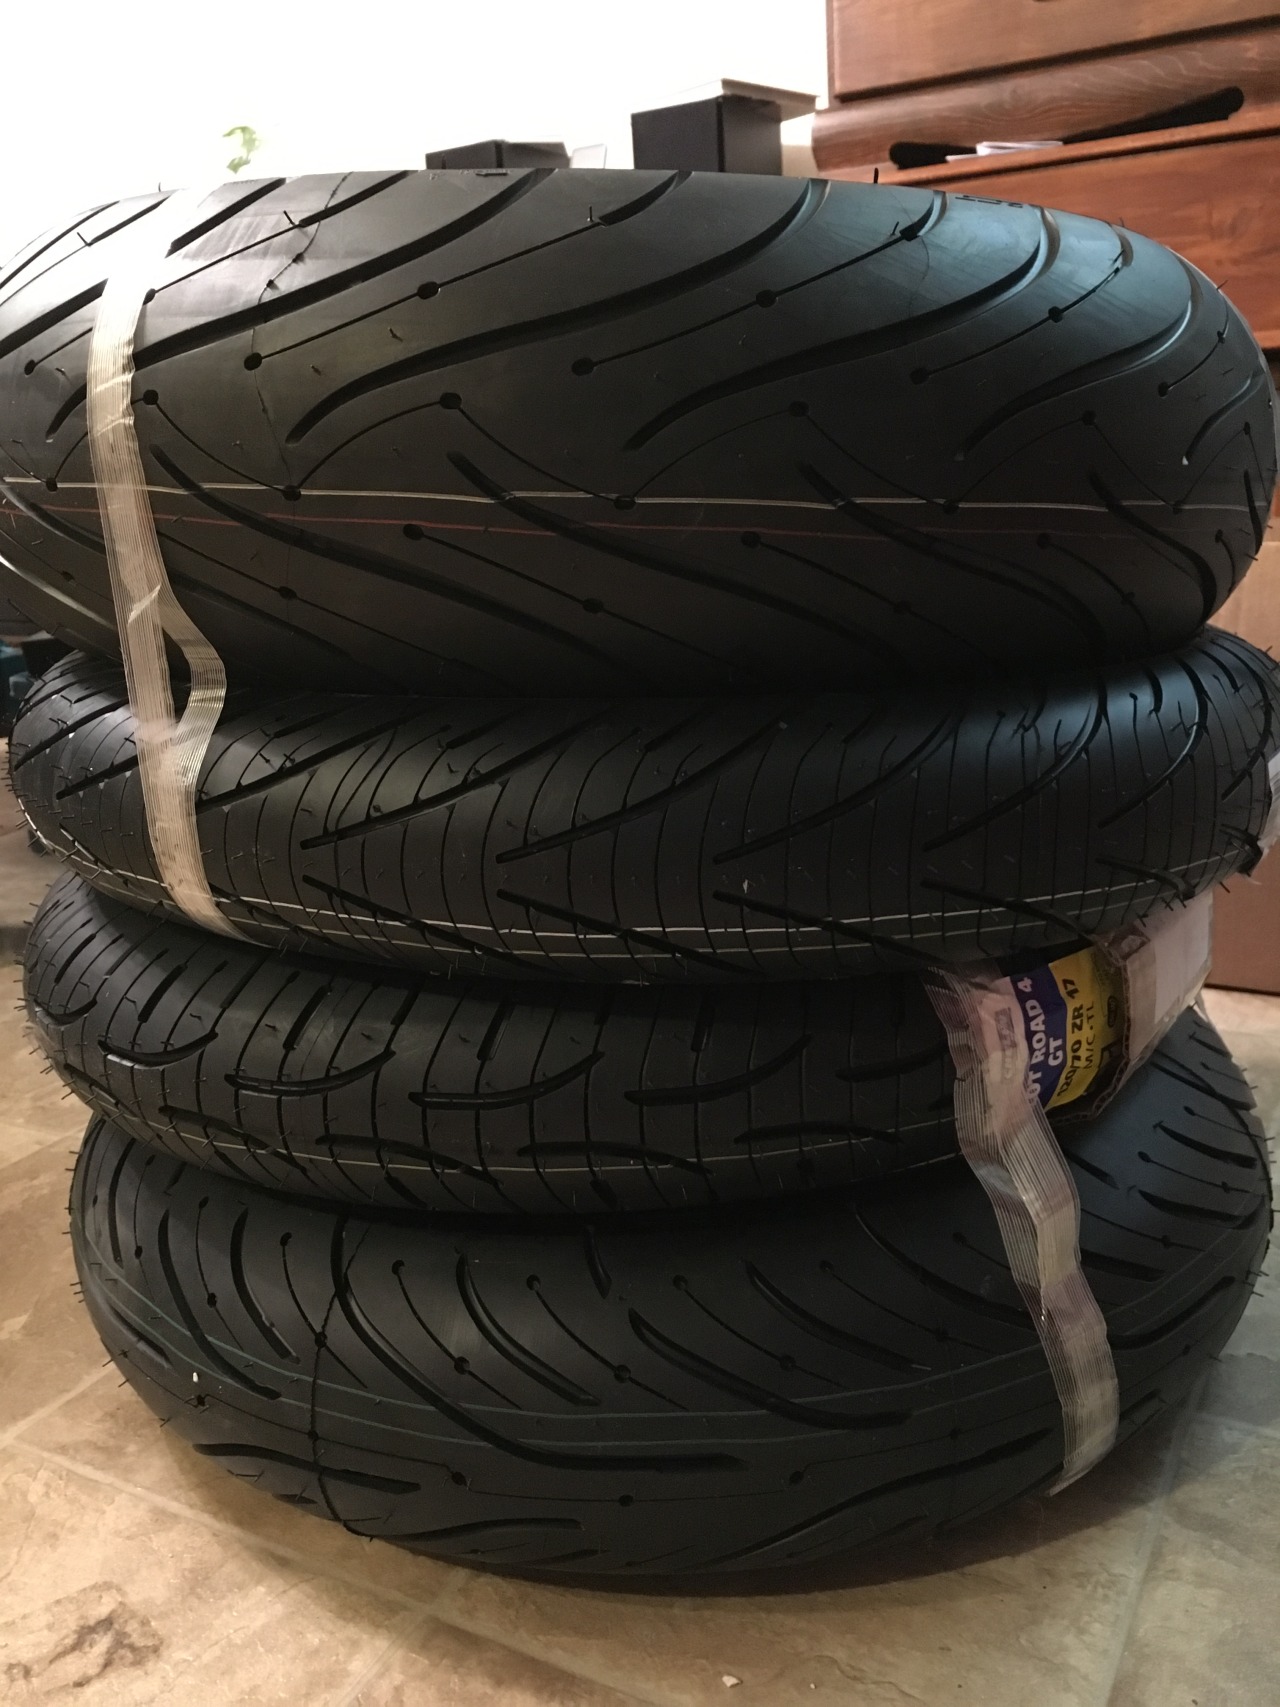 All the Motorbike Tires